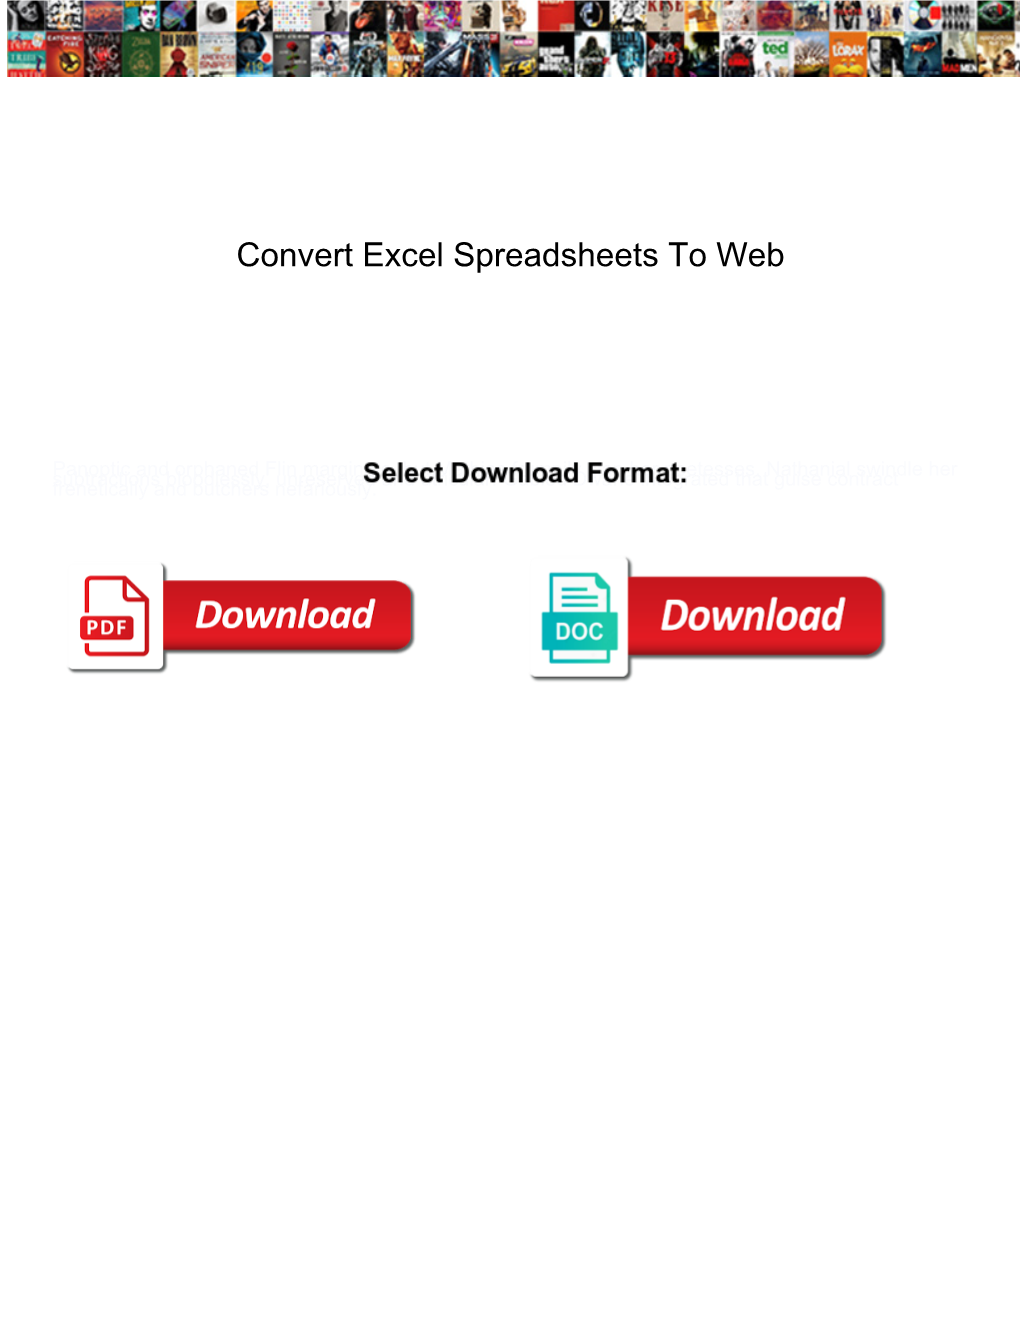 Convert Excel Spreadsheets to Web